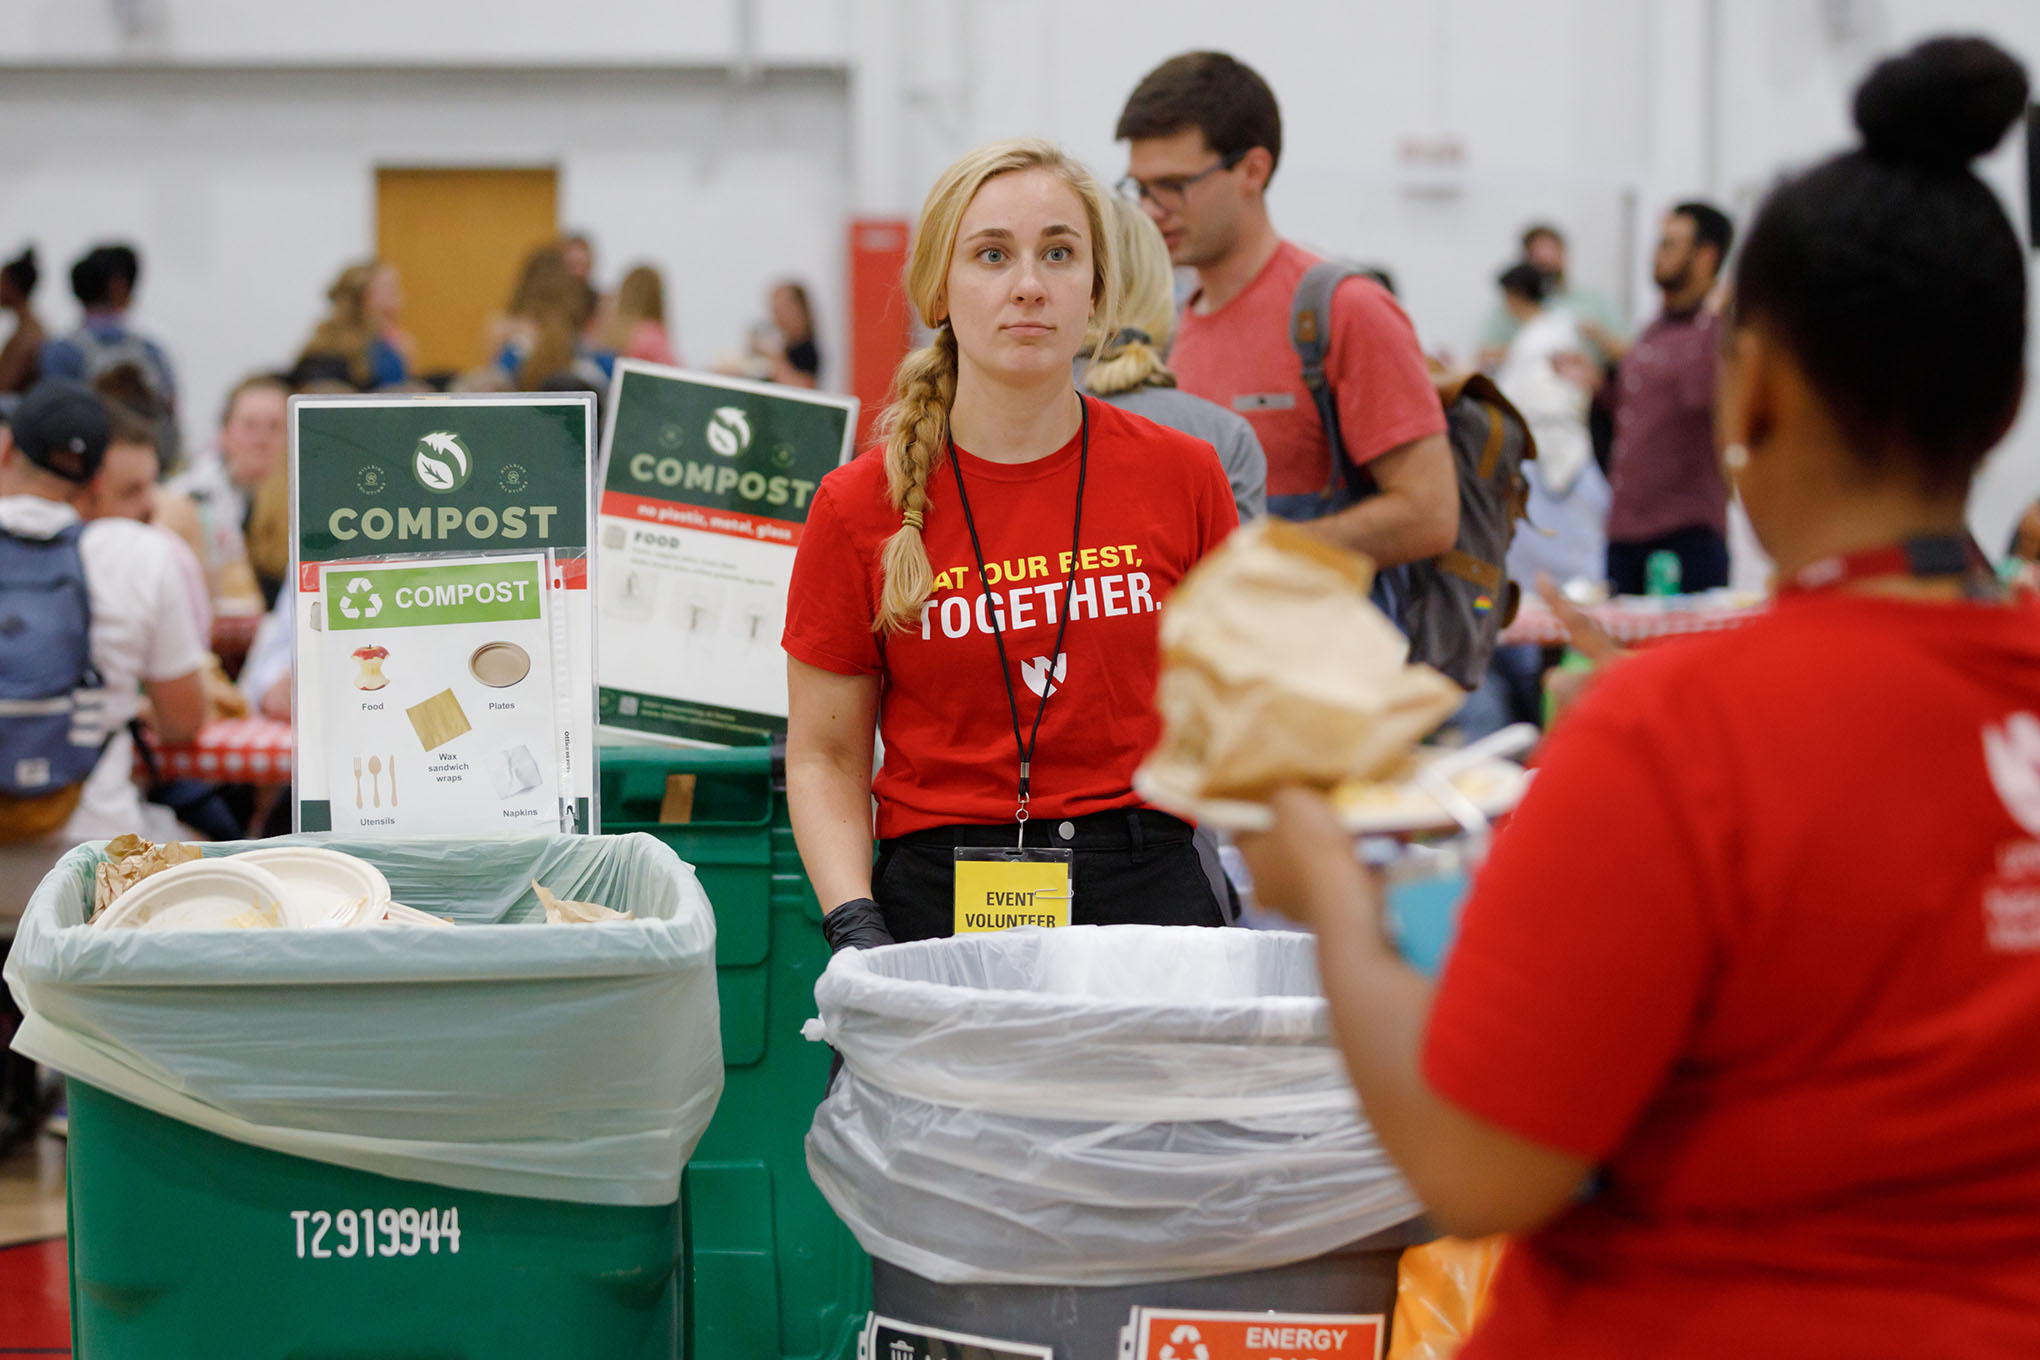 The UNMC Office of Sustainability set up waste stations that included composting and recycling options&comma; and attendees were shown how to sort their waste&period;